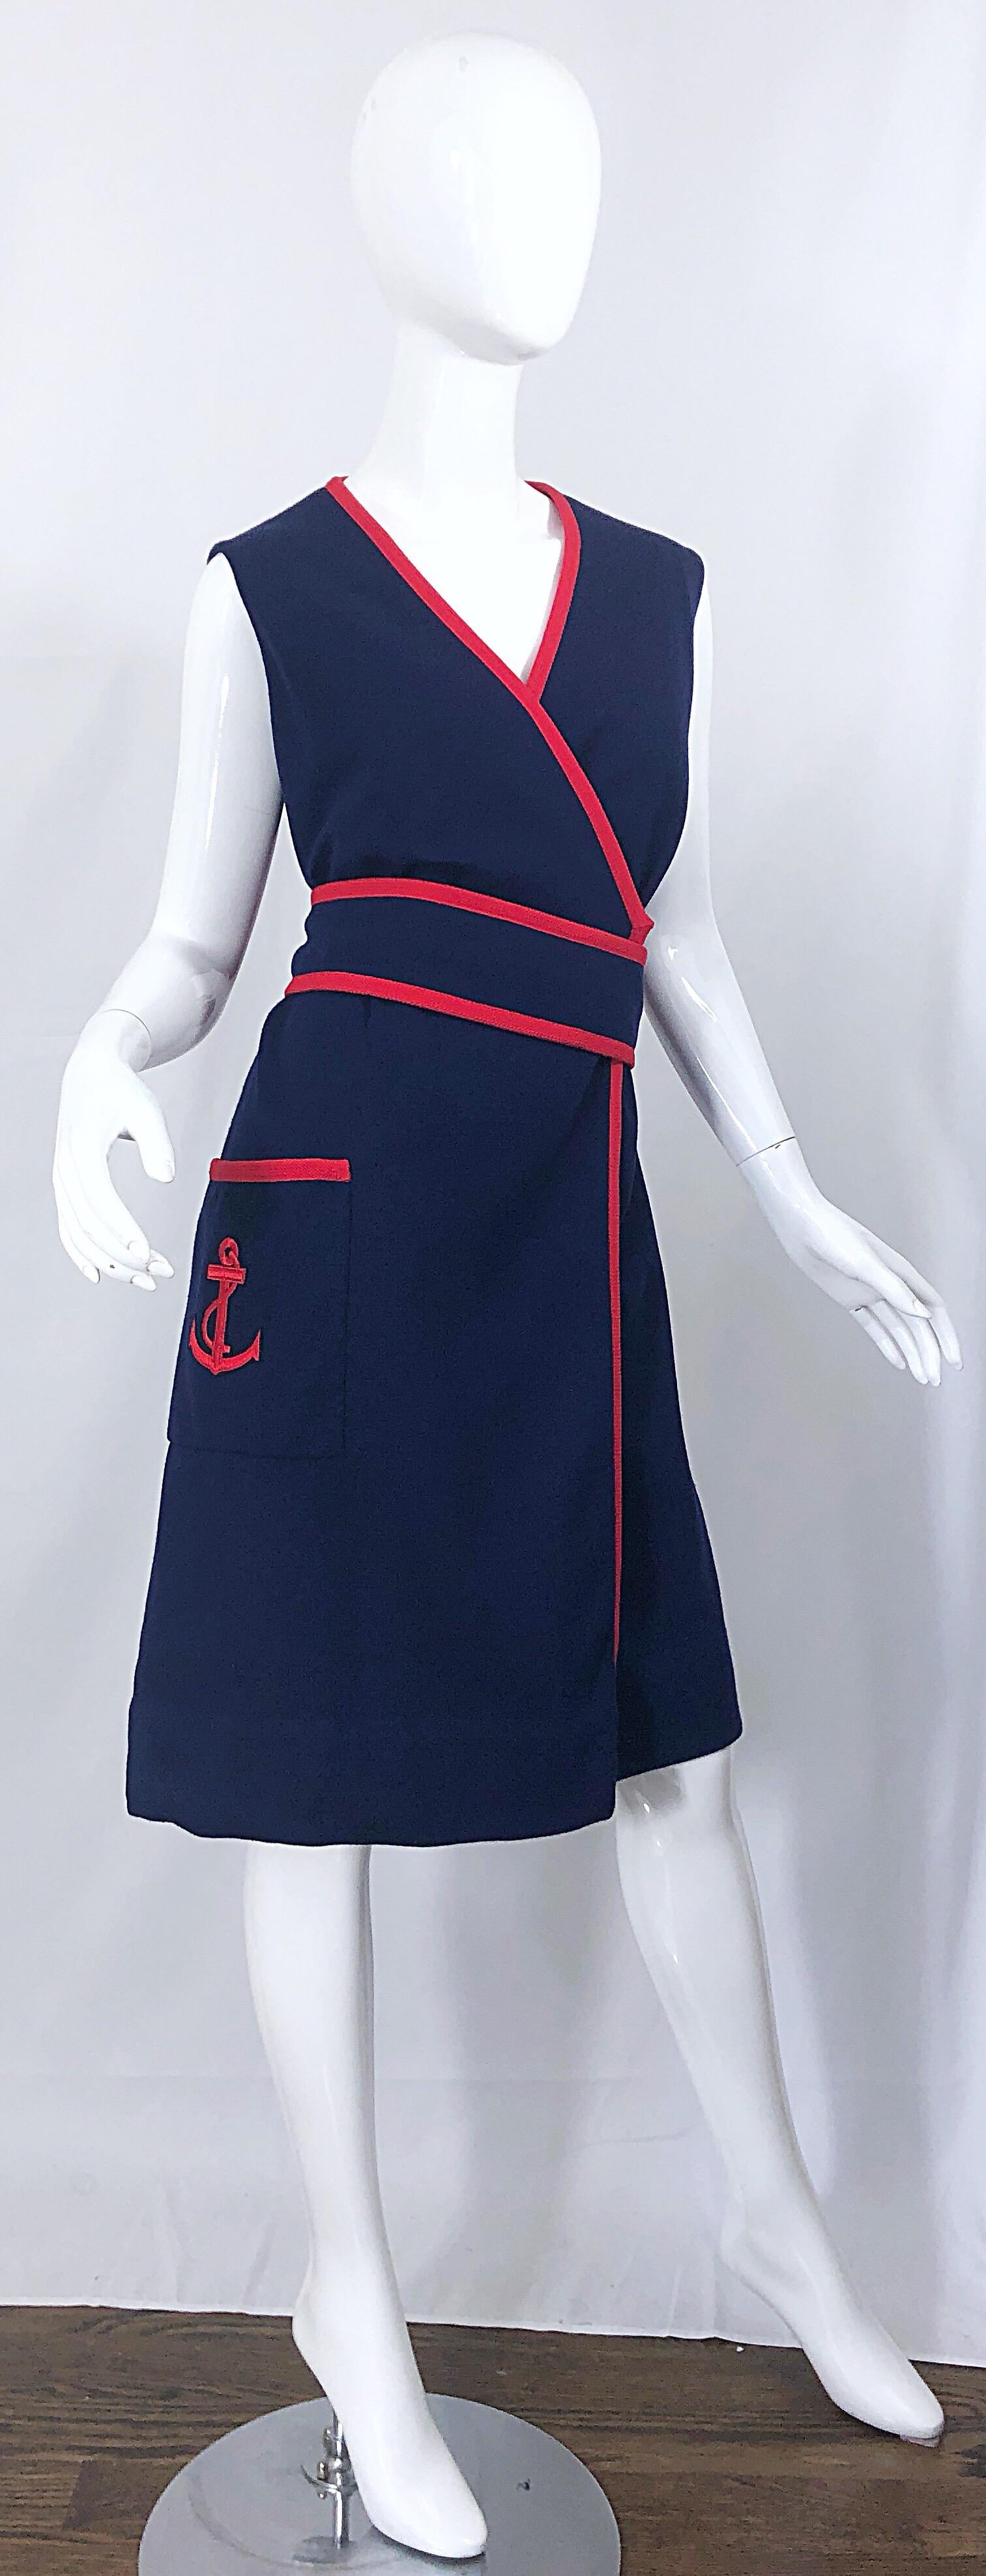 Chic 1960s TEAL TRAINA larger size navy blue and red nautical 'anchor' belted wool wrap dress!   Features a soft navy blue virgin wool with red accents. Red anchor embroidered at the left hip pocket. Interior side button closure, with hook-and-eye